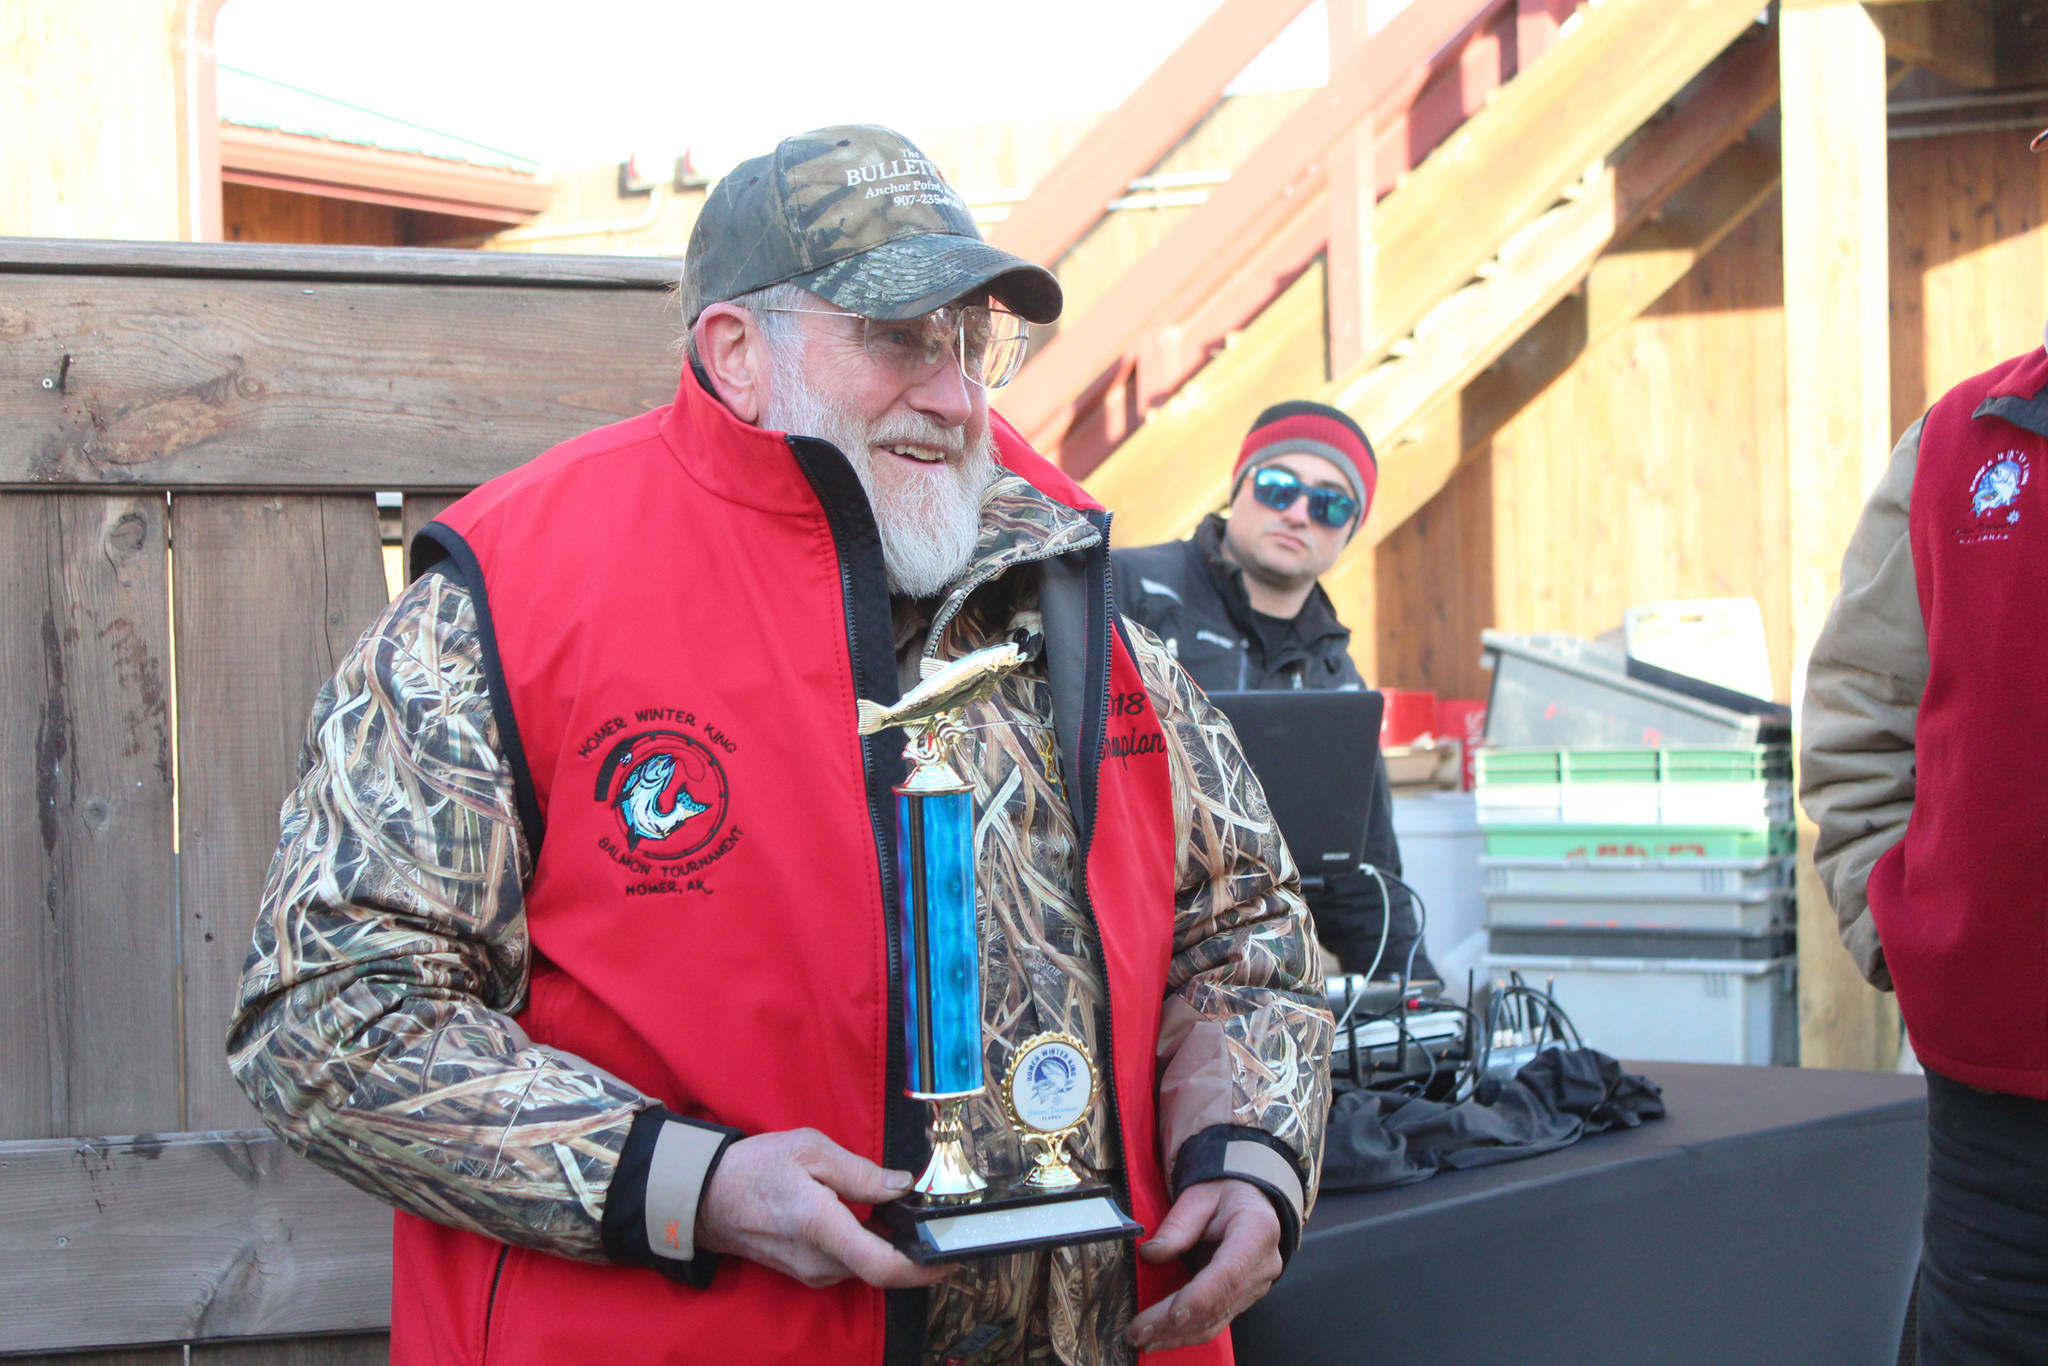 Charlie Edwards of the Optimist holds his trophy after winning this year’s Winter King Salmon Tournament on Saturday, March 24, 2018 on the Spit in Homer, Alaska. His winning fish weighed 24.6 pounds. (Photo by Megan Pacer/Homer News)